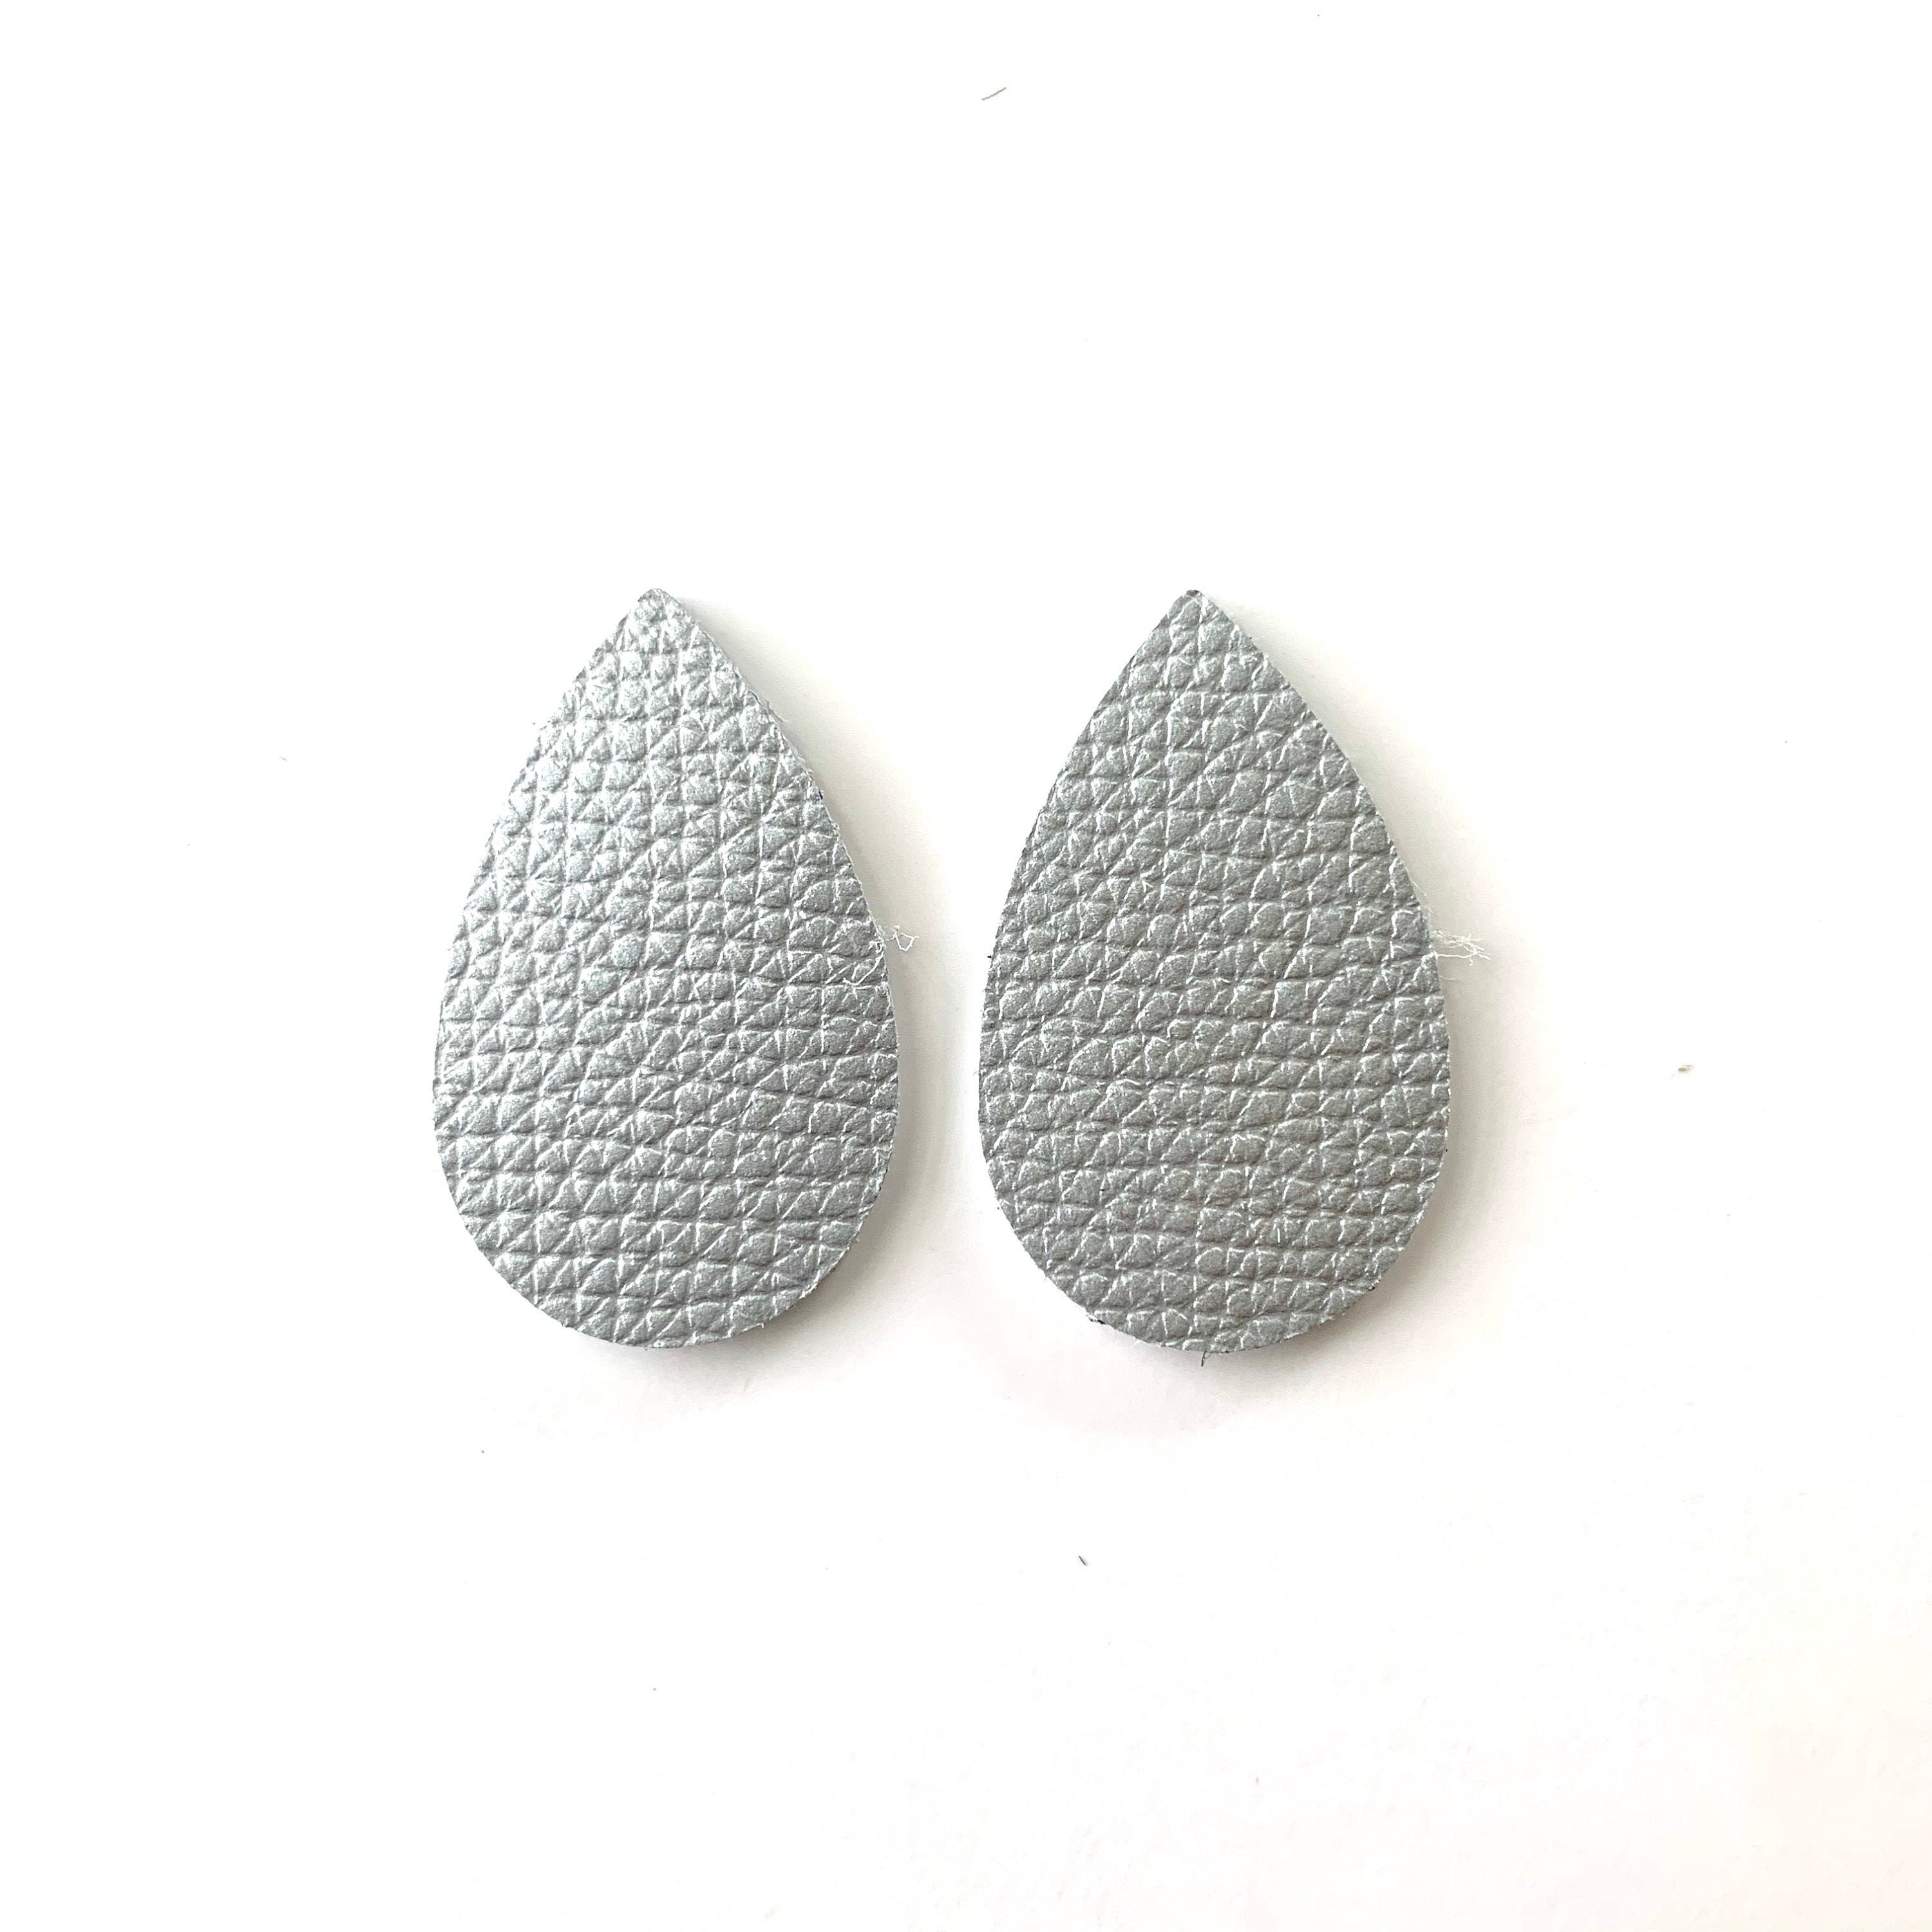 New Shimmer Silver TINY Small Teardrop Luxe Leather Genuine Shapes